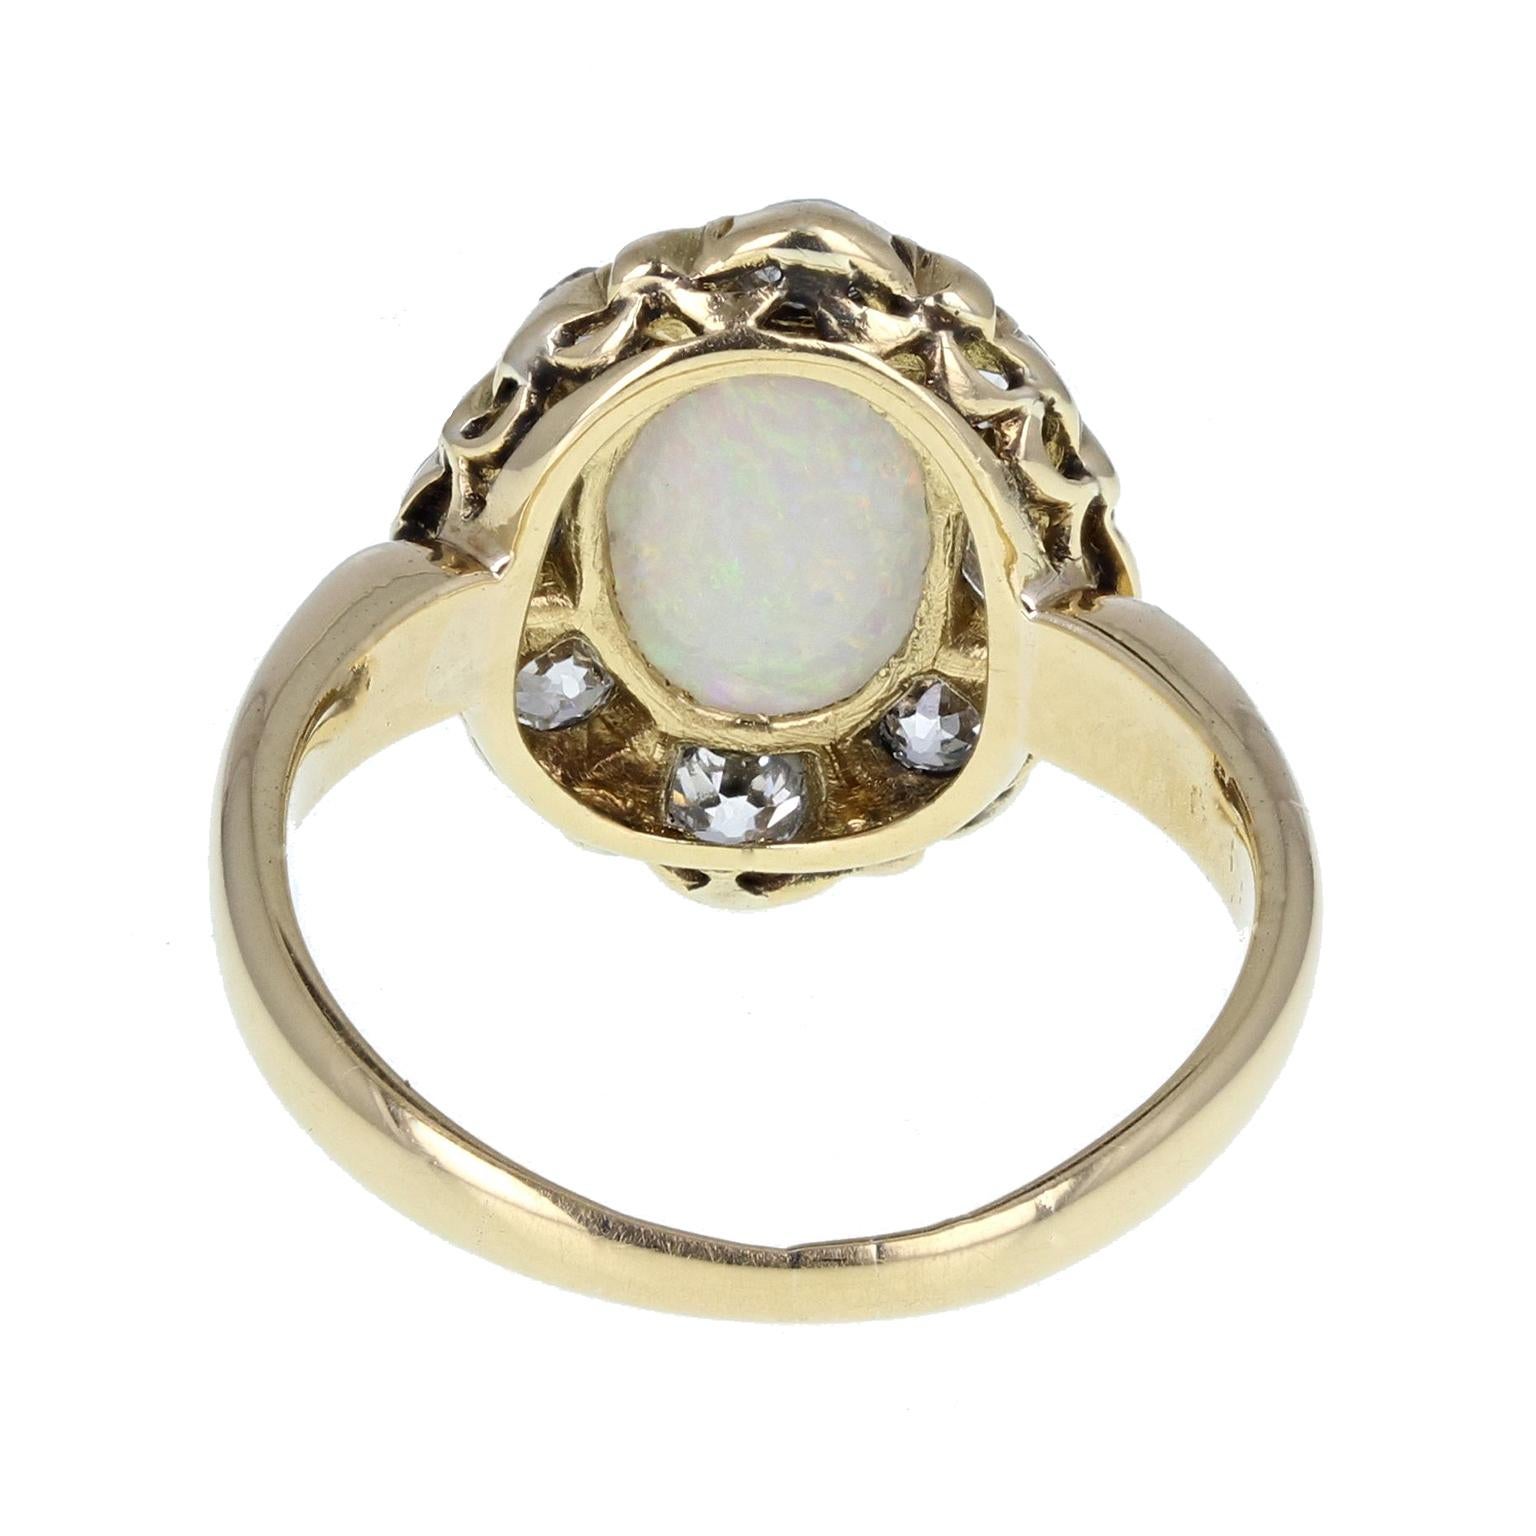 Antique Victorian 18 Carat Gold Opal Diamond Cluster Cocktail Dress Ring In Excellent Condition For Sale In Newcastle Upon Tyne, GB